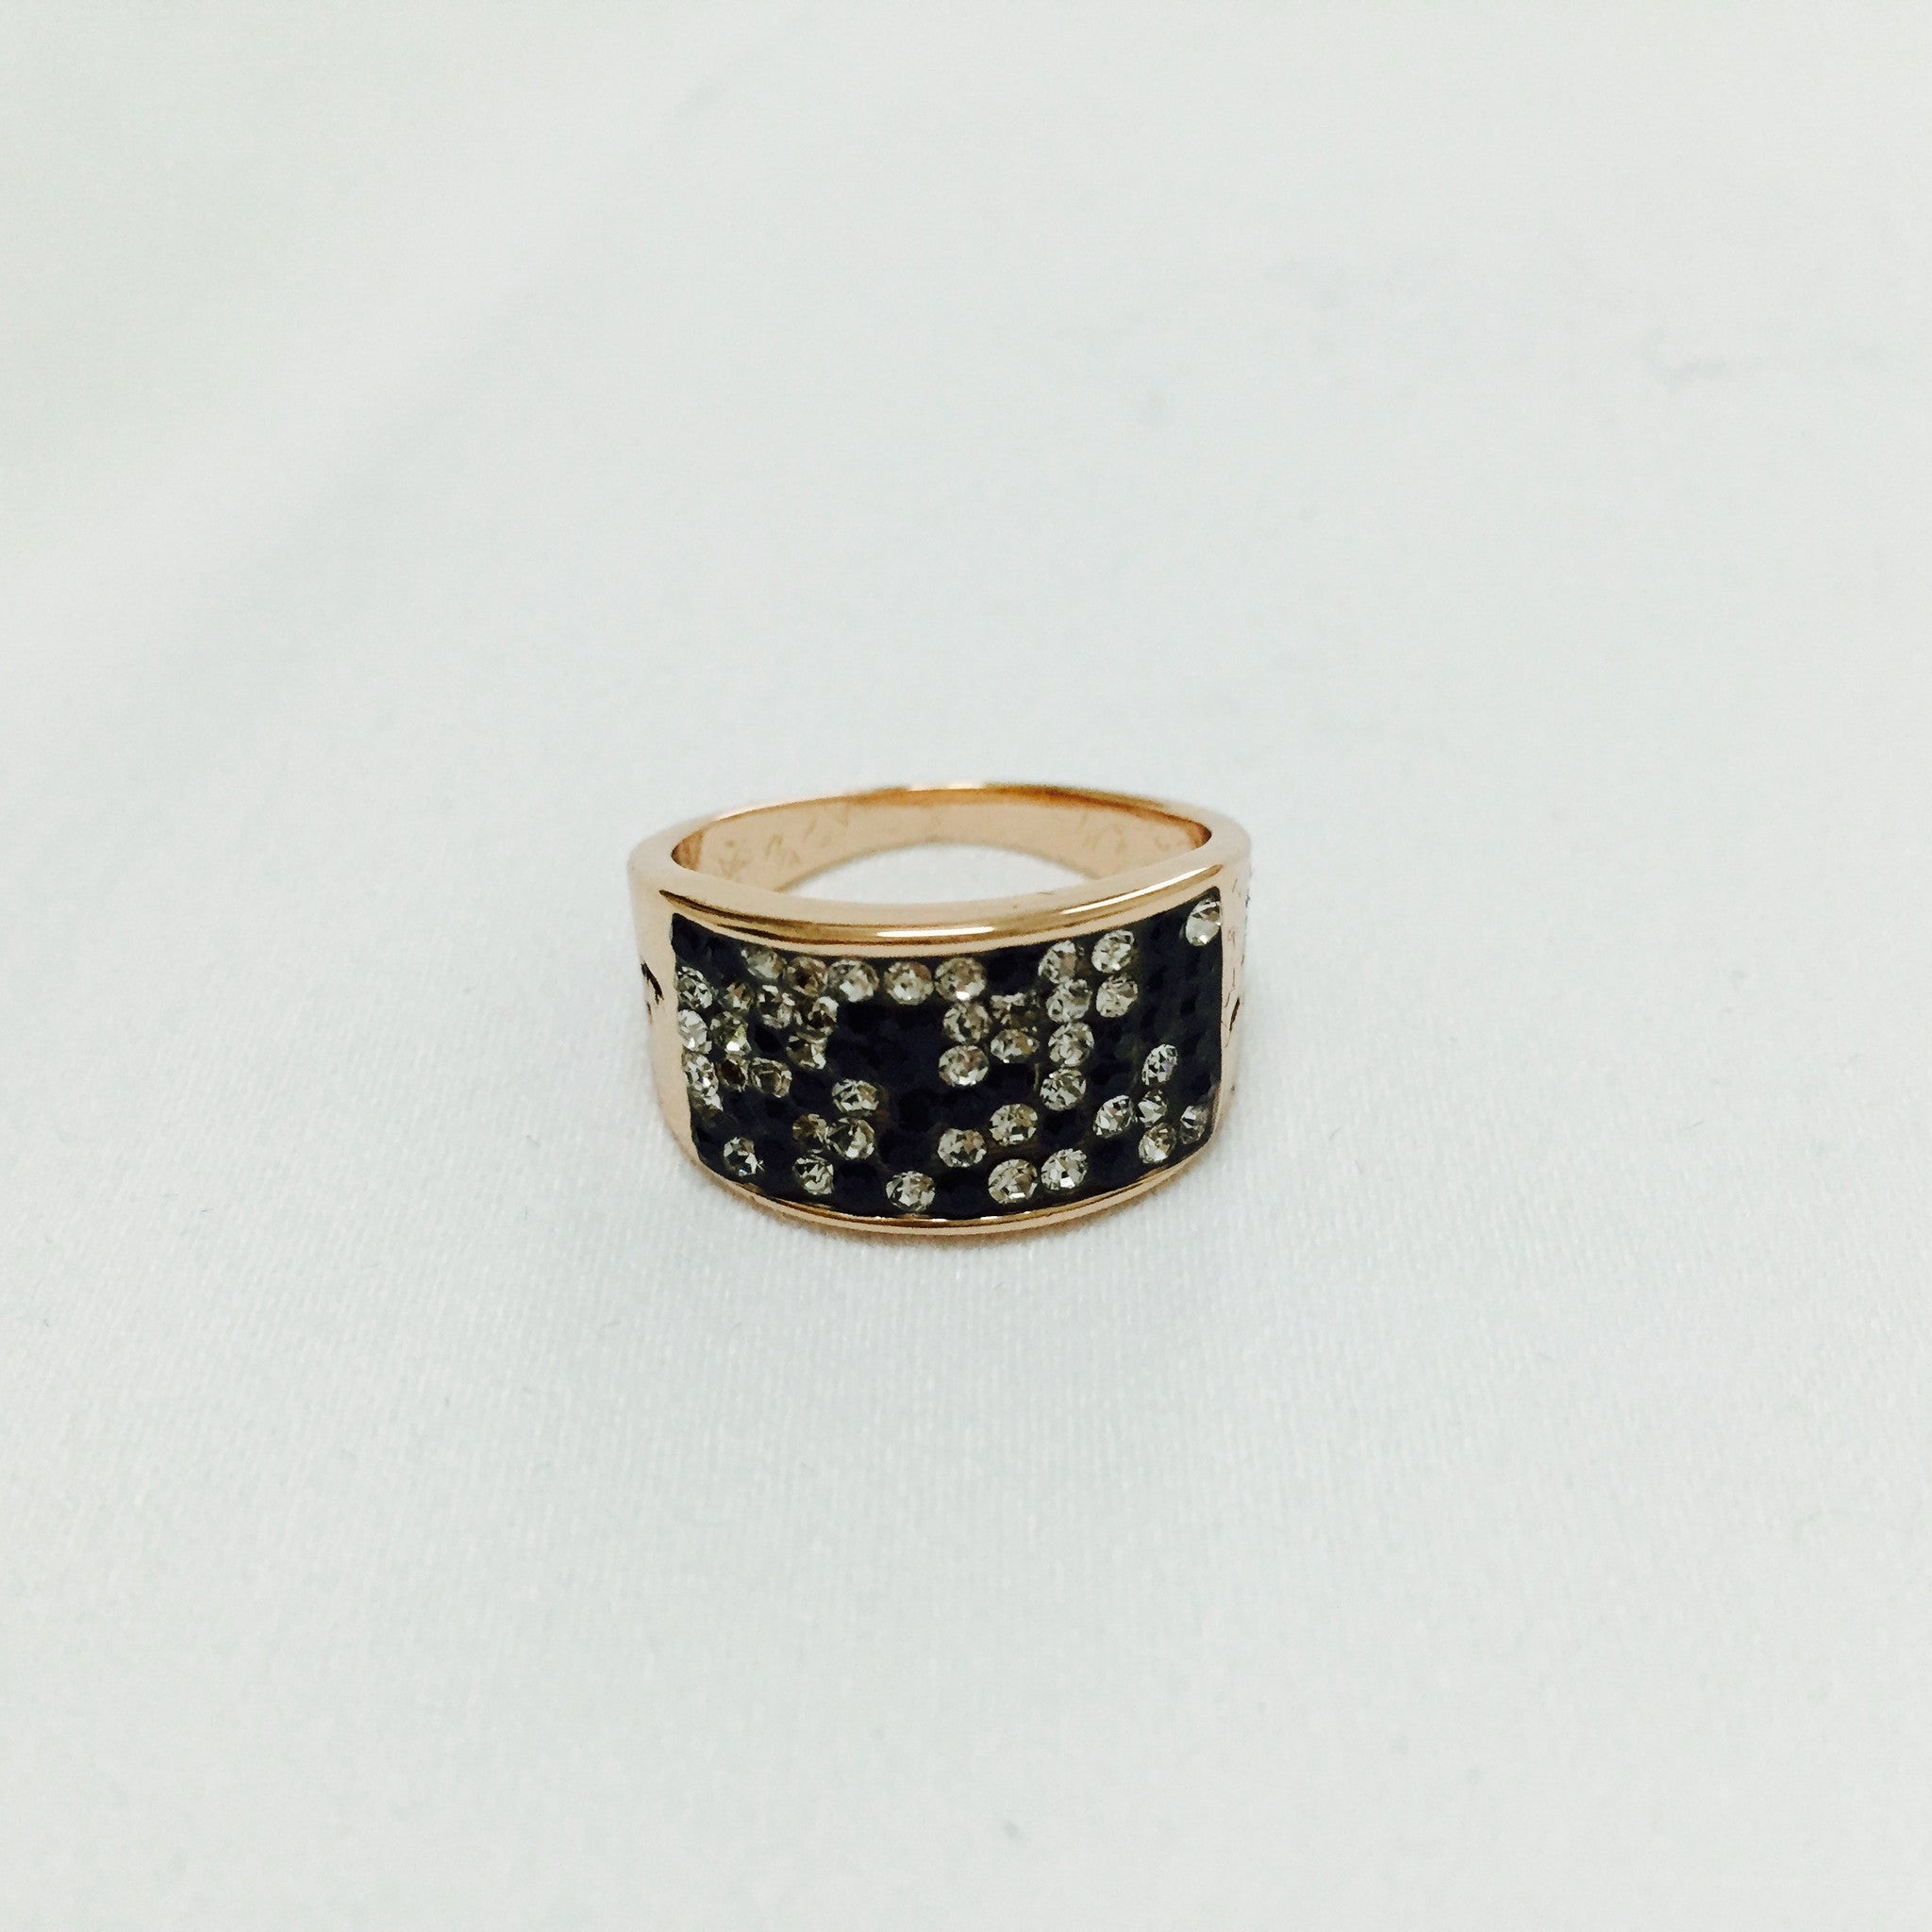 NFC Jewelry - Ring with Bling and NTAG203